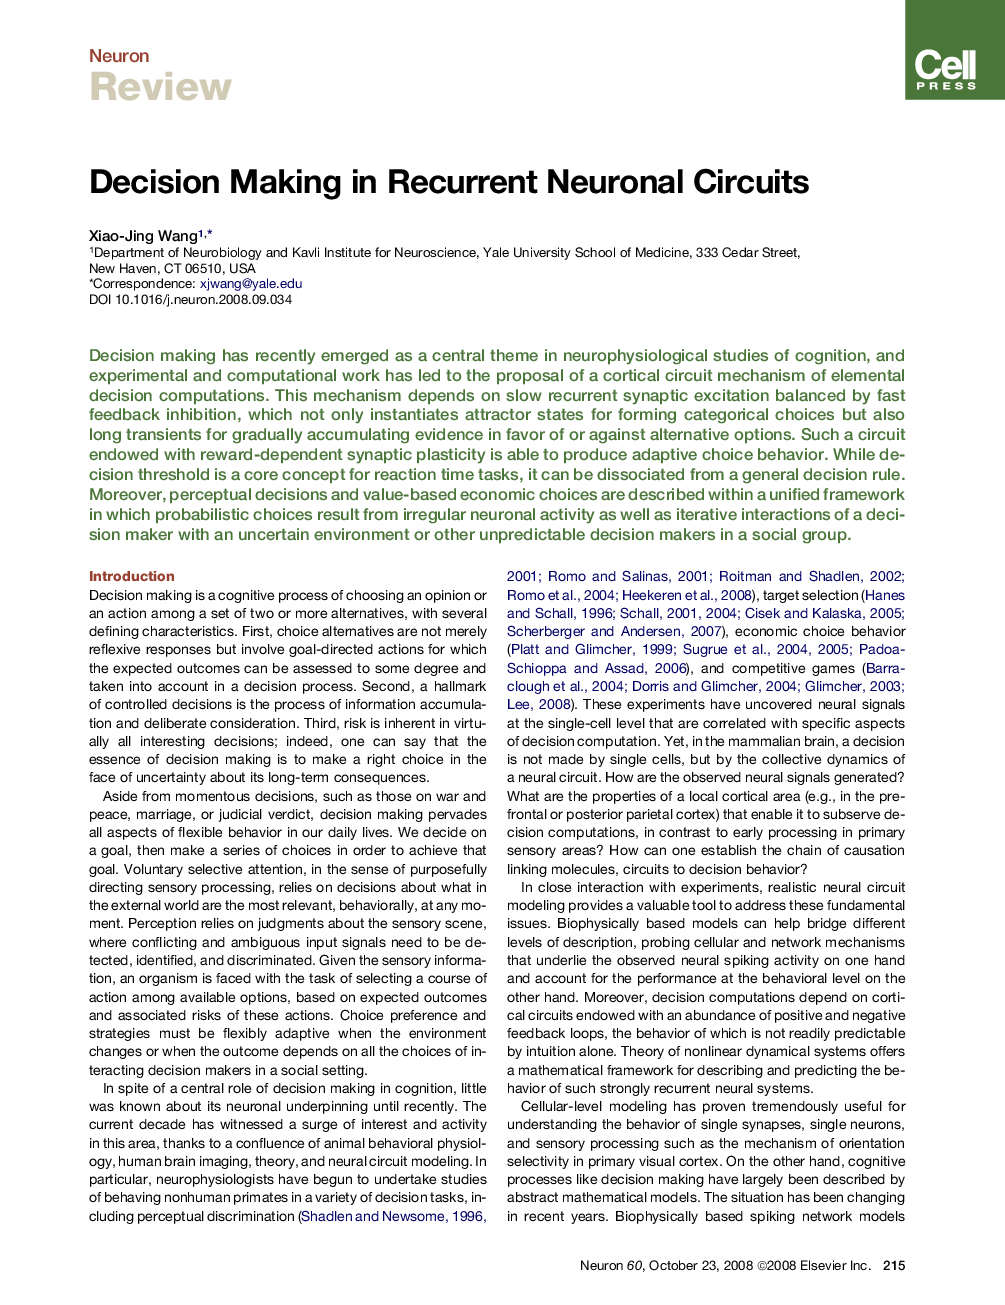 Decision Making in Recurrent Neuronal Circuits